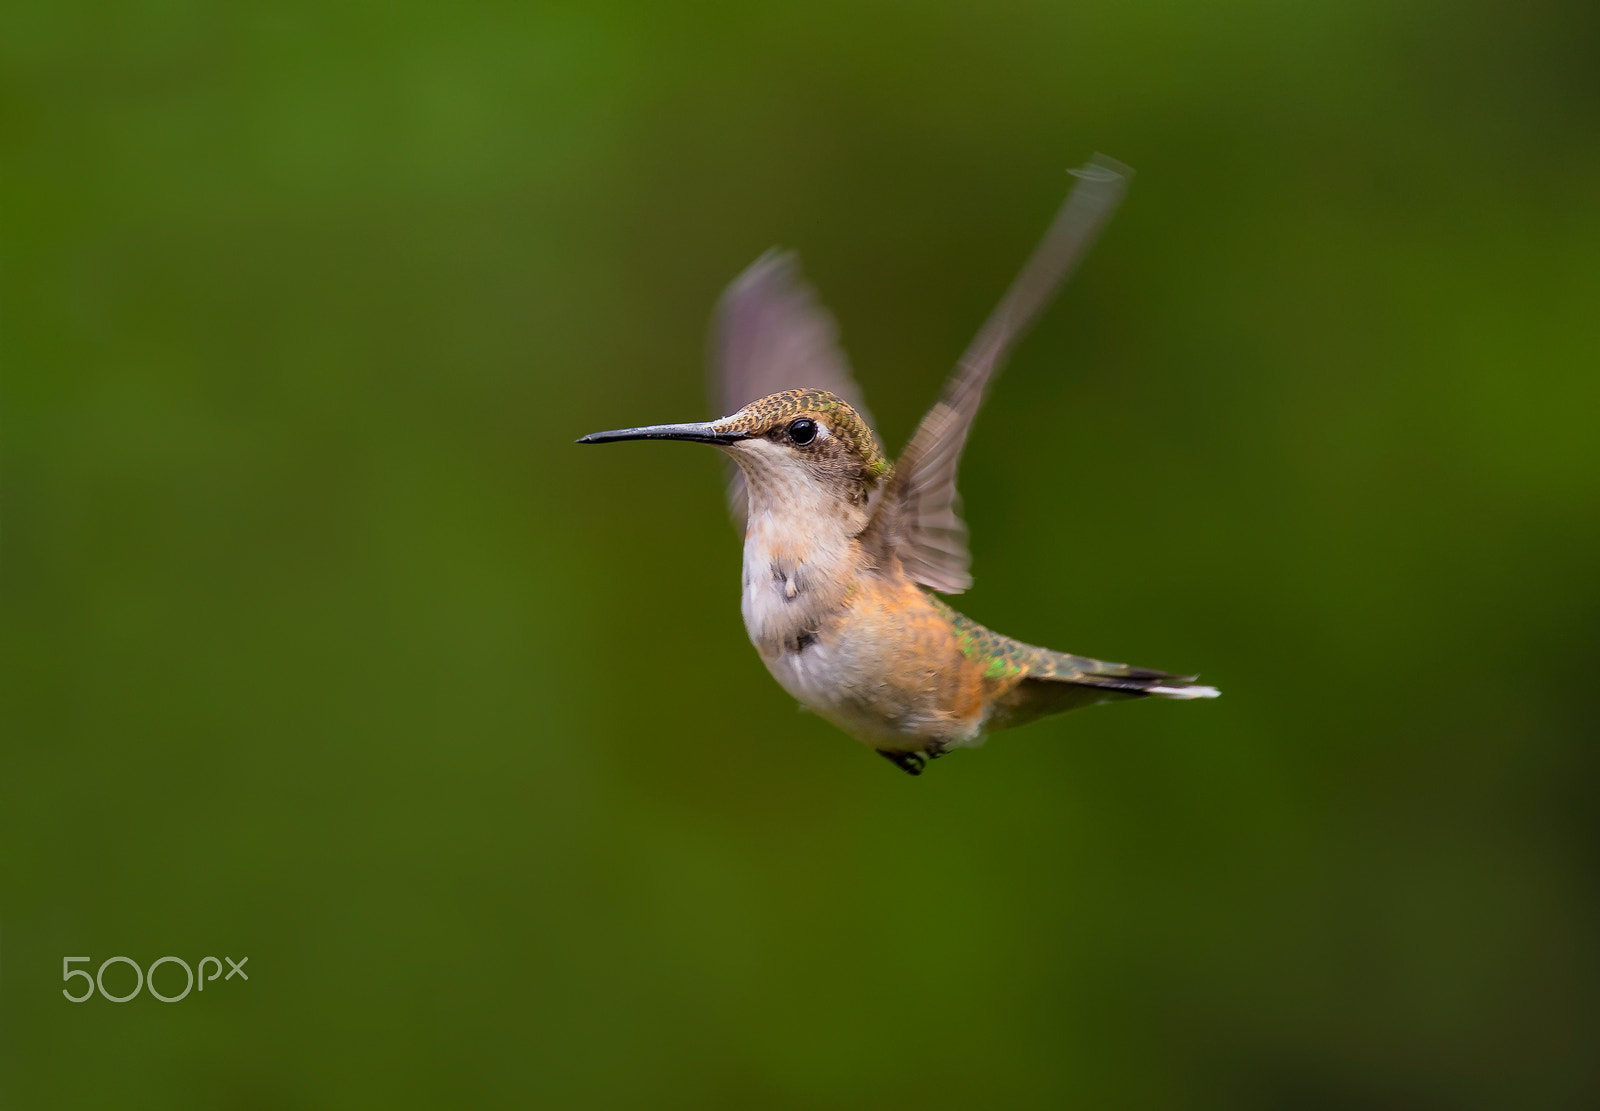 Ruby-Throated Hummingbird hovering